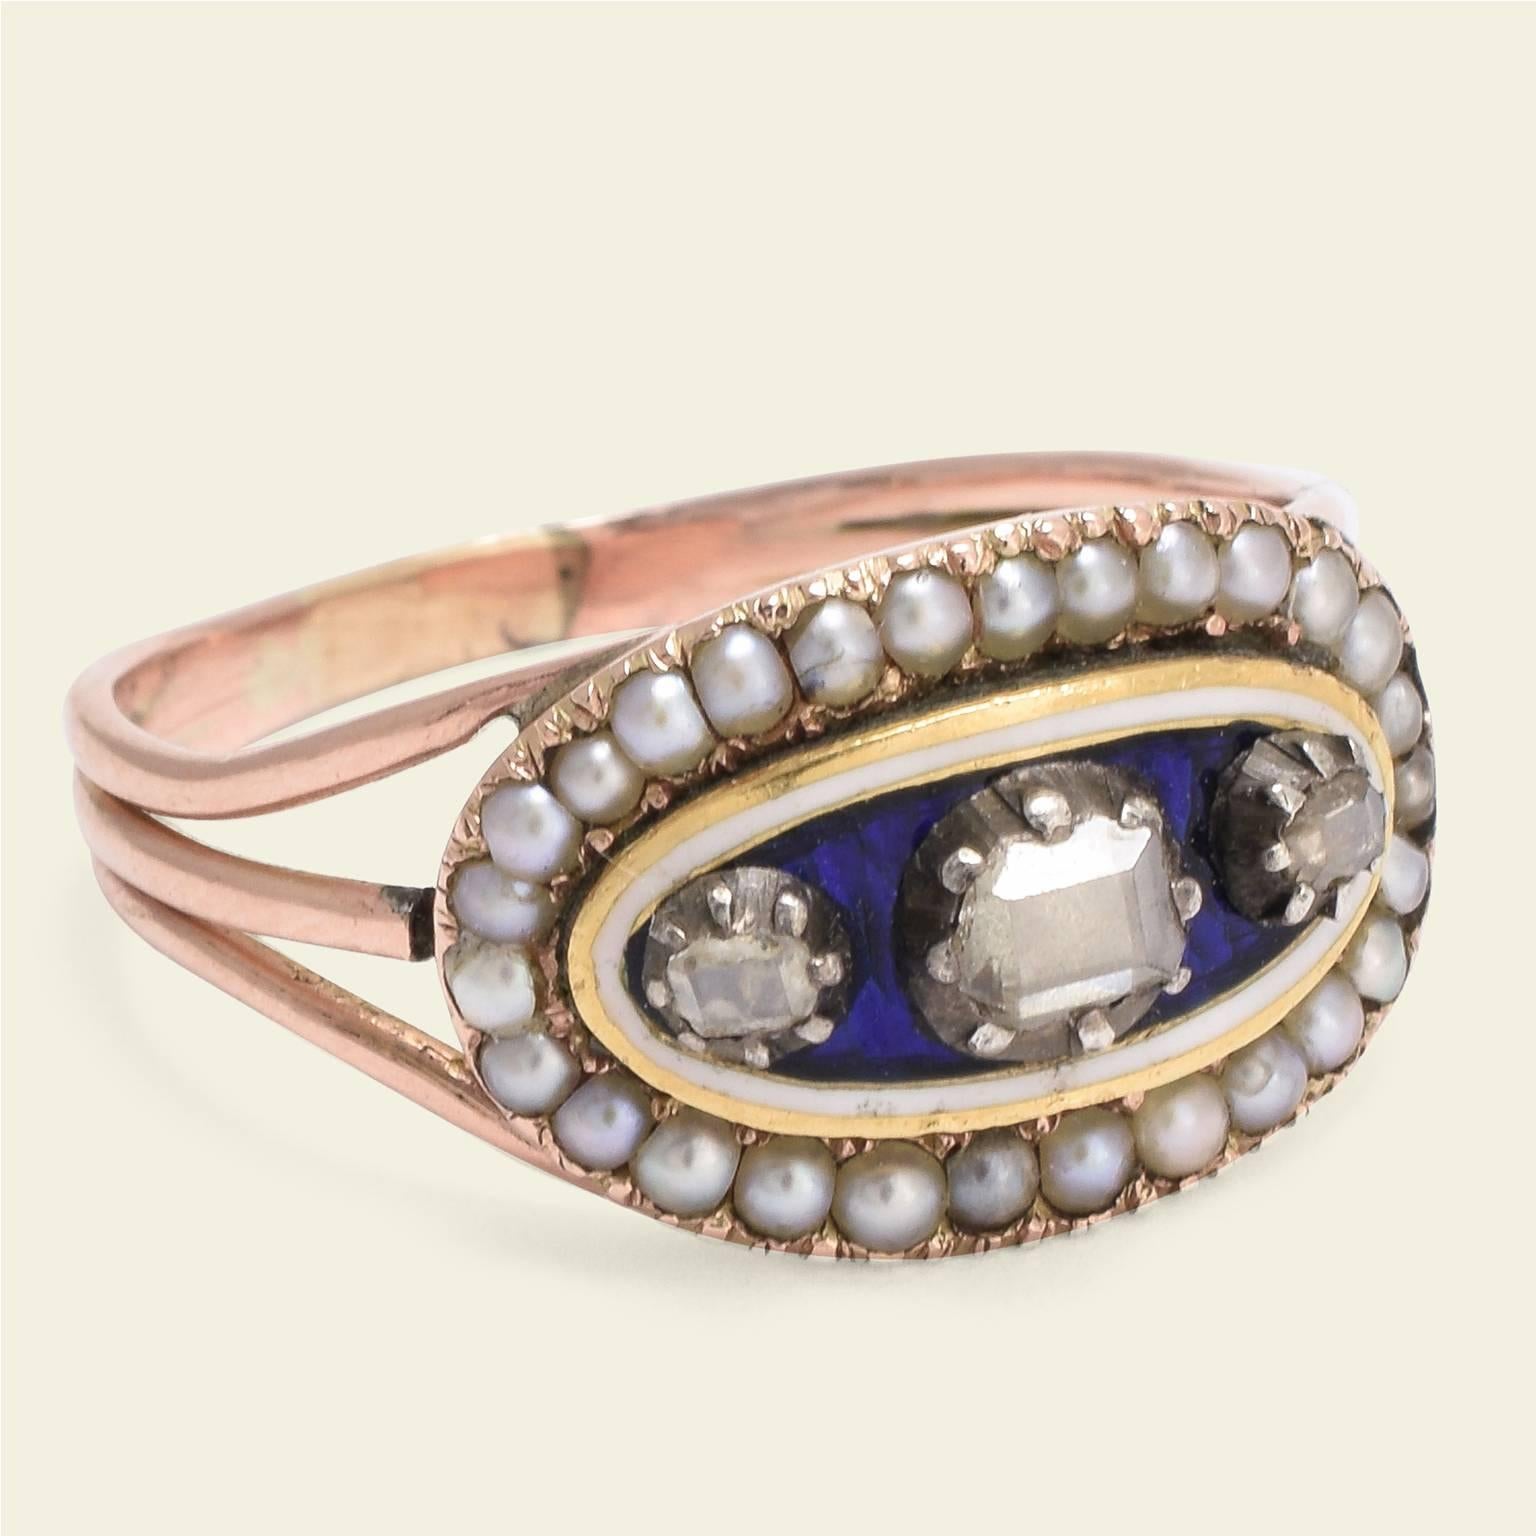 This Georgian ring is a beautiful example of early nineteenth century workmanship. The oval face of the ring features a royal blue center panel punctuated with three table cut diamonds haloed in white enamel and seed pearls. Rings such as this were